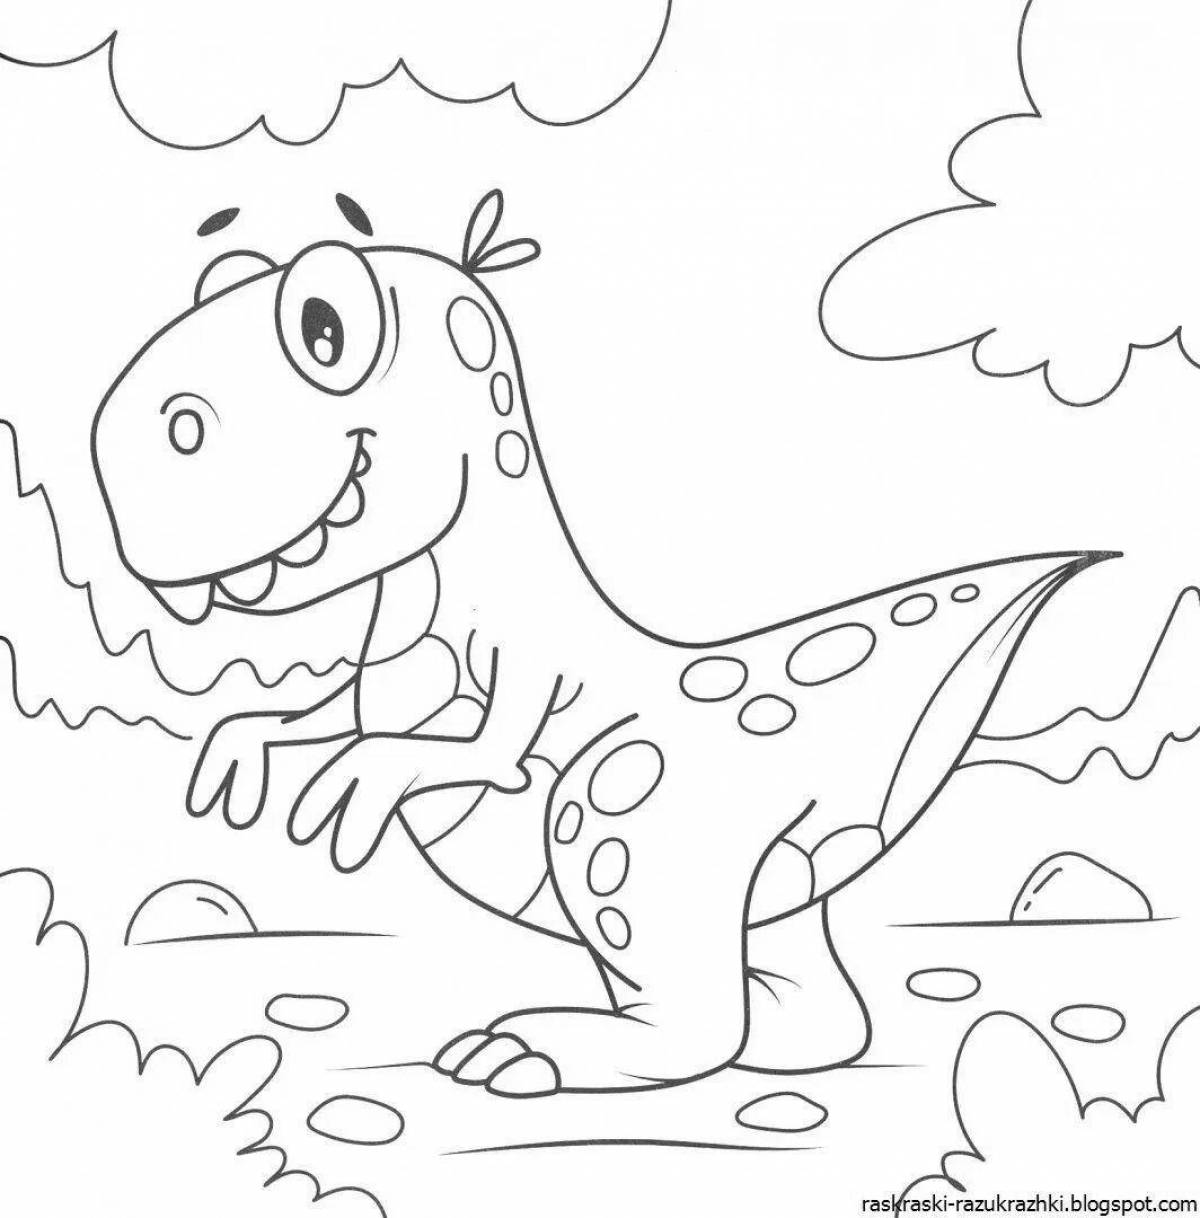 Unique dinosaurs coloring book for 4-5 year olds